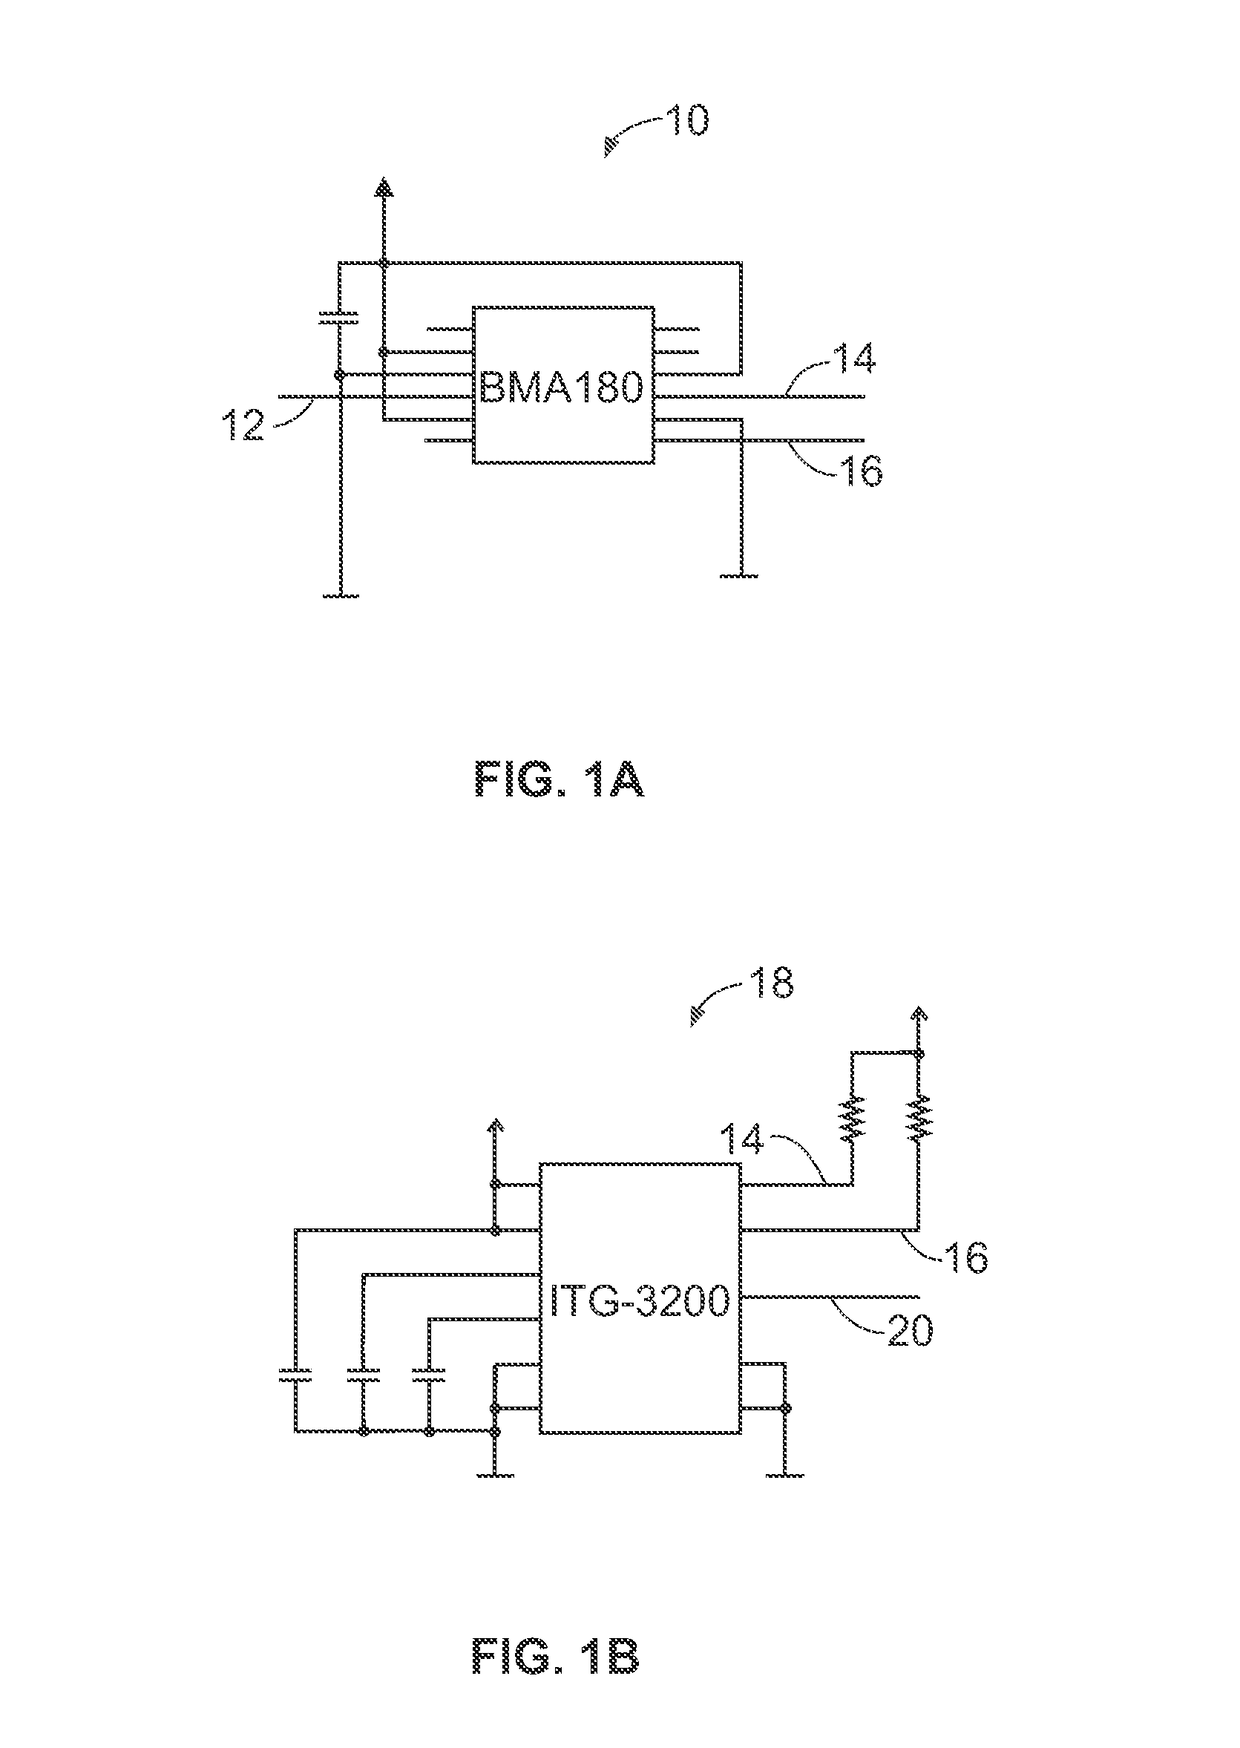 Motion attributes recognition system and methods